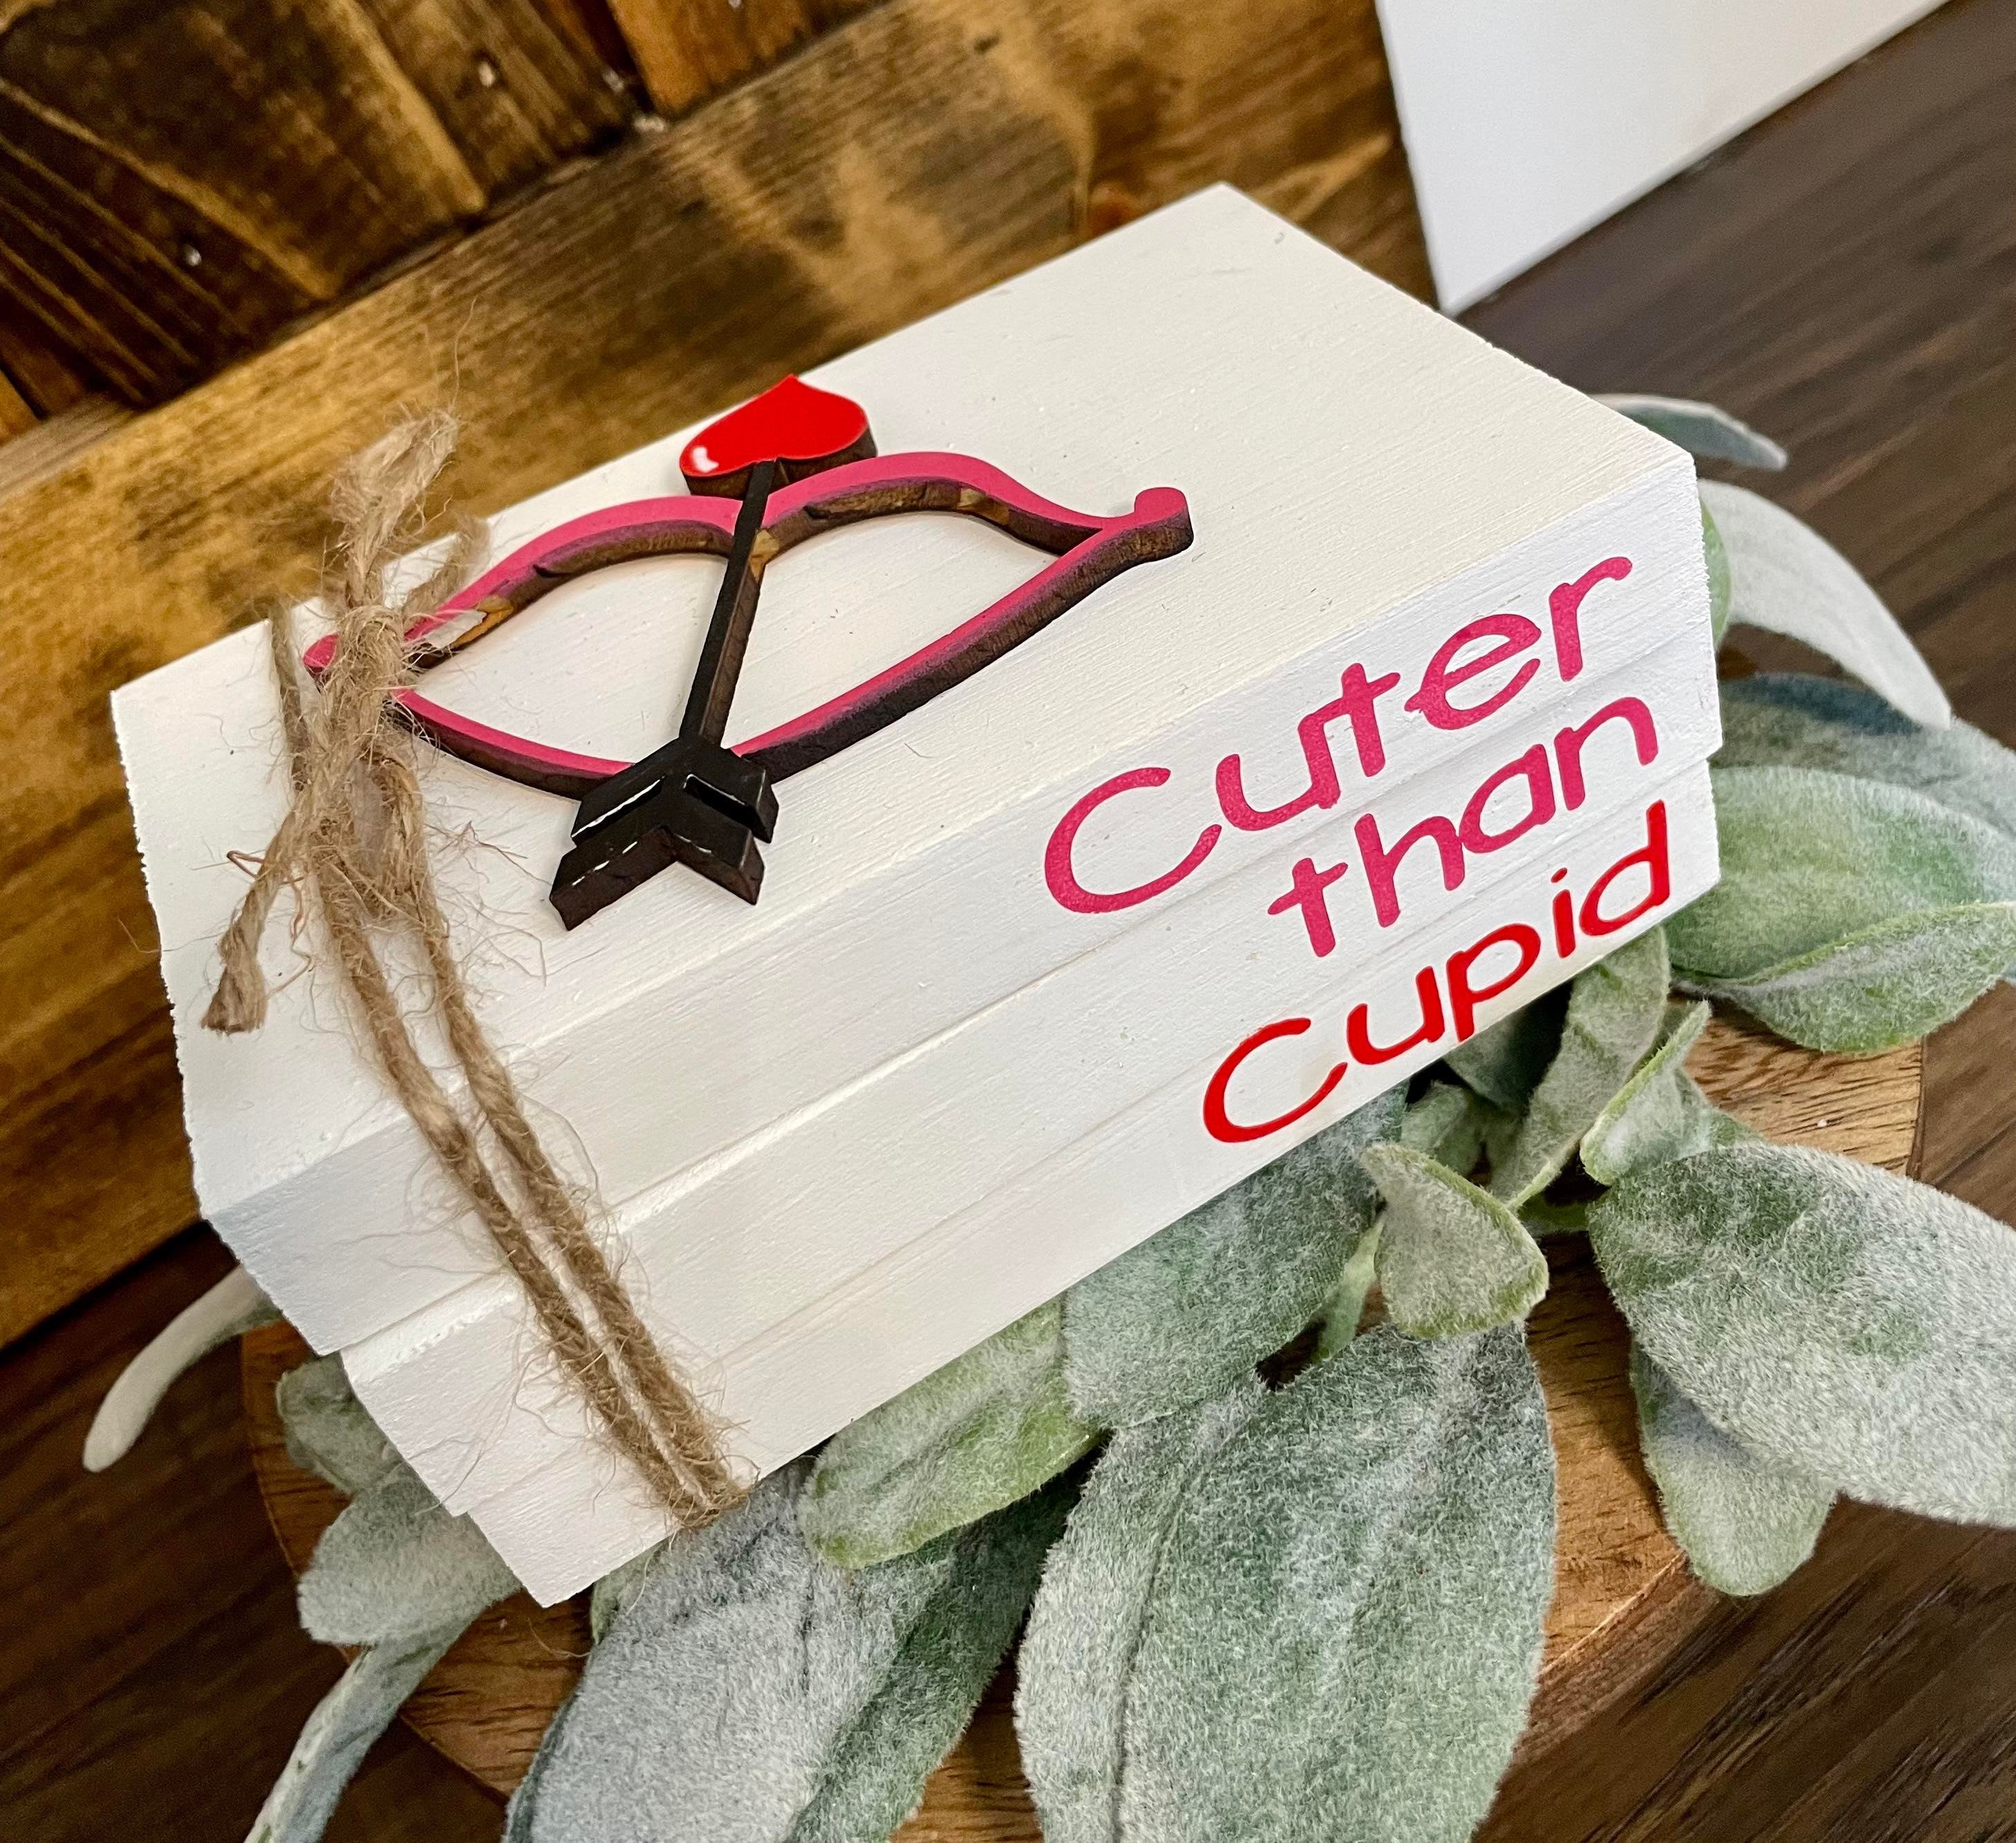 Tiered Tray Mini Book Stack - Cuter than Cupid